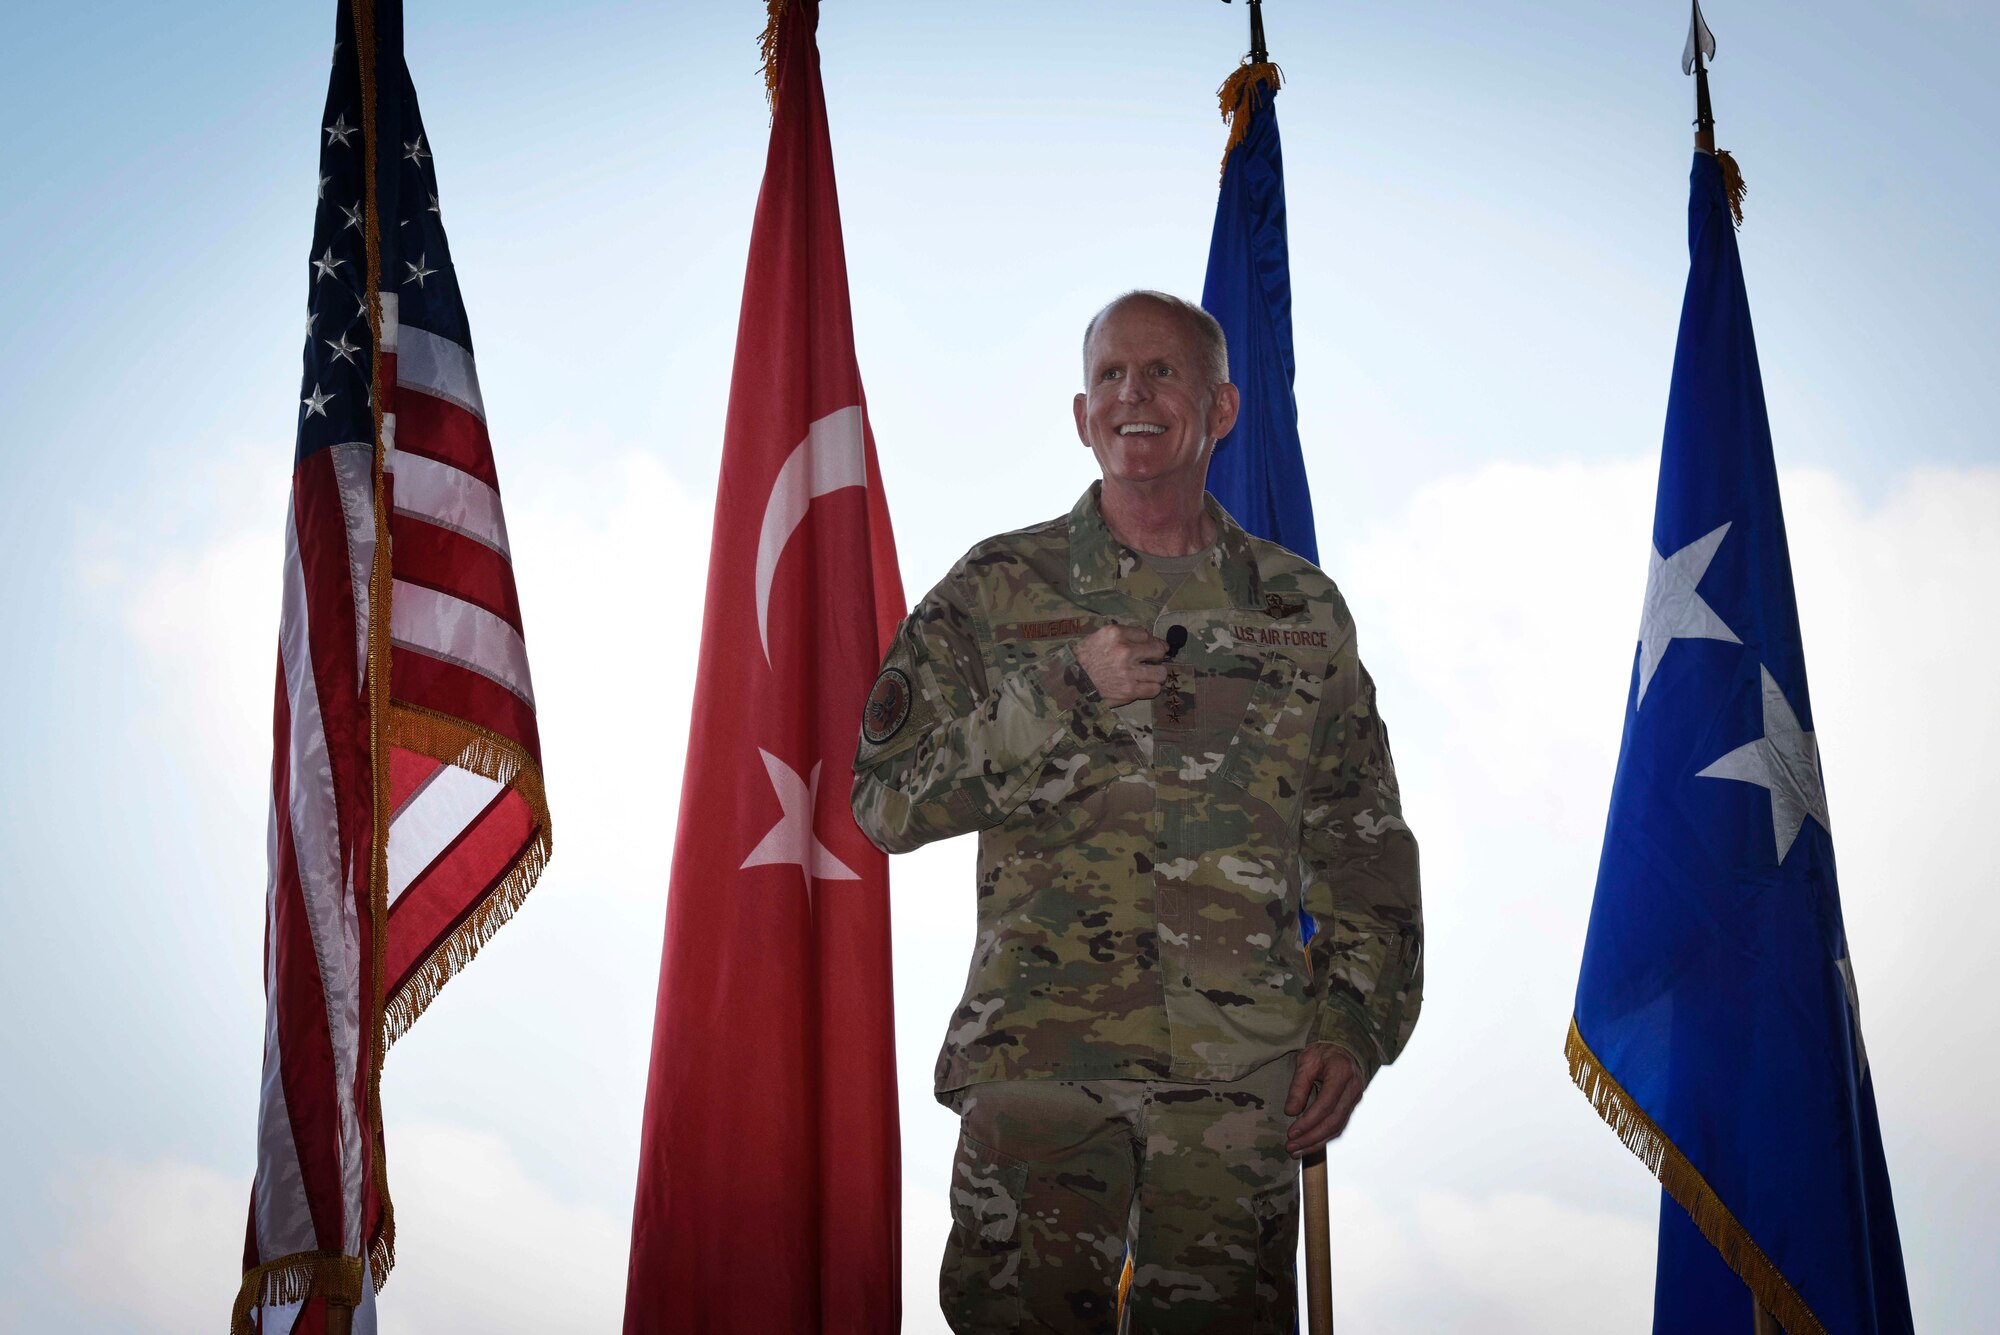 U.S. Air Force Vice Chief of Staff Stephen W. Wilson addresses Airmen during an all-call at Incirlik Air Base, Turkey, Sept. 30, 2019. Wilson toured facilities and spoke with Airmen about various topics including readiness, resiliency and the strategic importance of their mission. (U.S. Air Force photo by Staff Sgt. Joshua Magbanua)